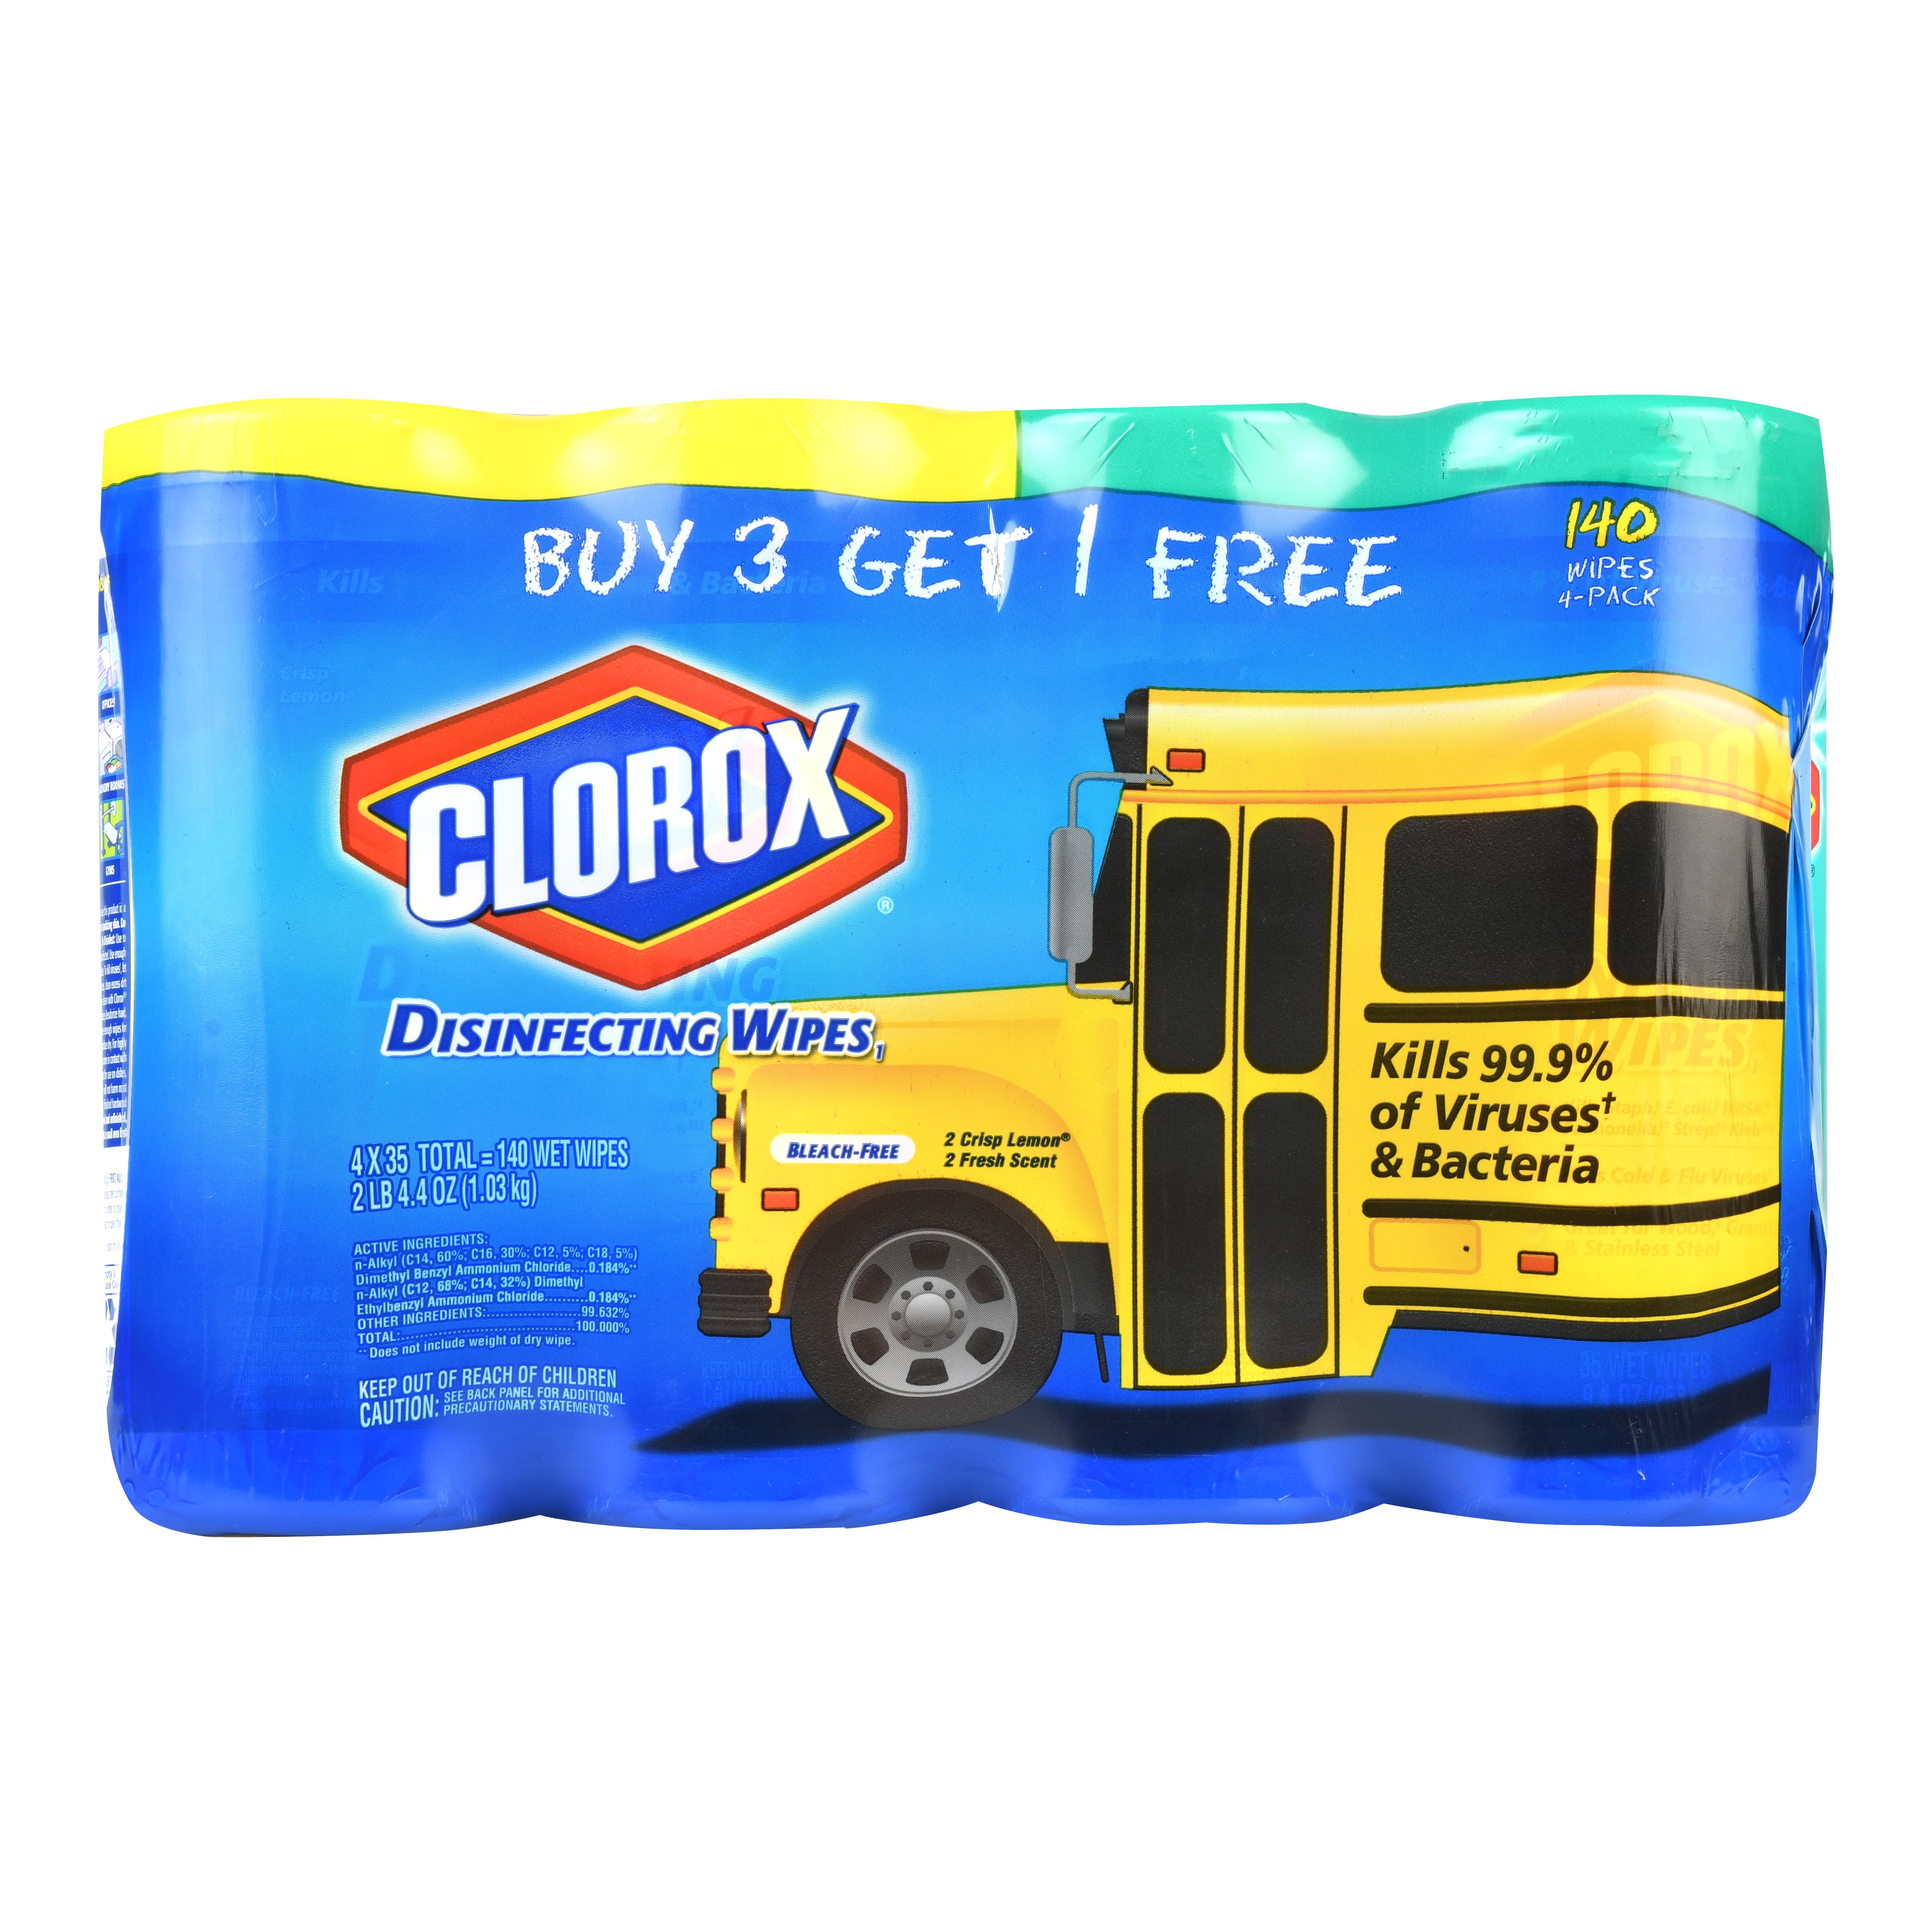 Clorox Disinfecting Wipes (140 Count Value Pack), Bleach Free Cleaning Wipes - 4 Pack - 35 Count Each - image 1 of 12